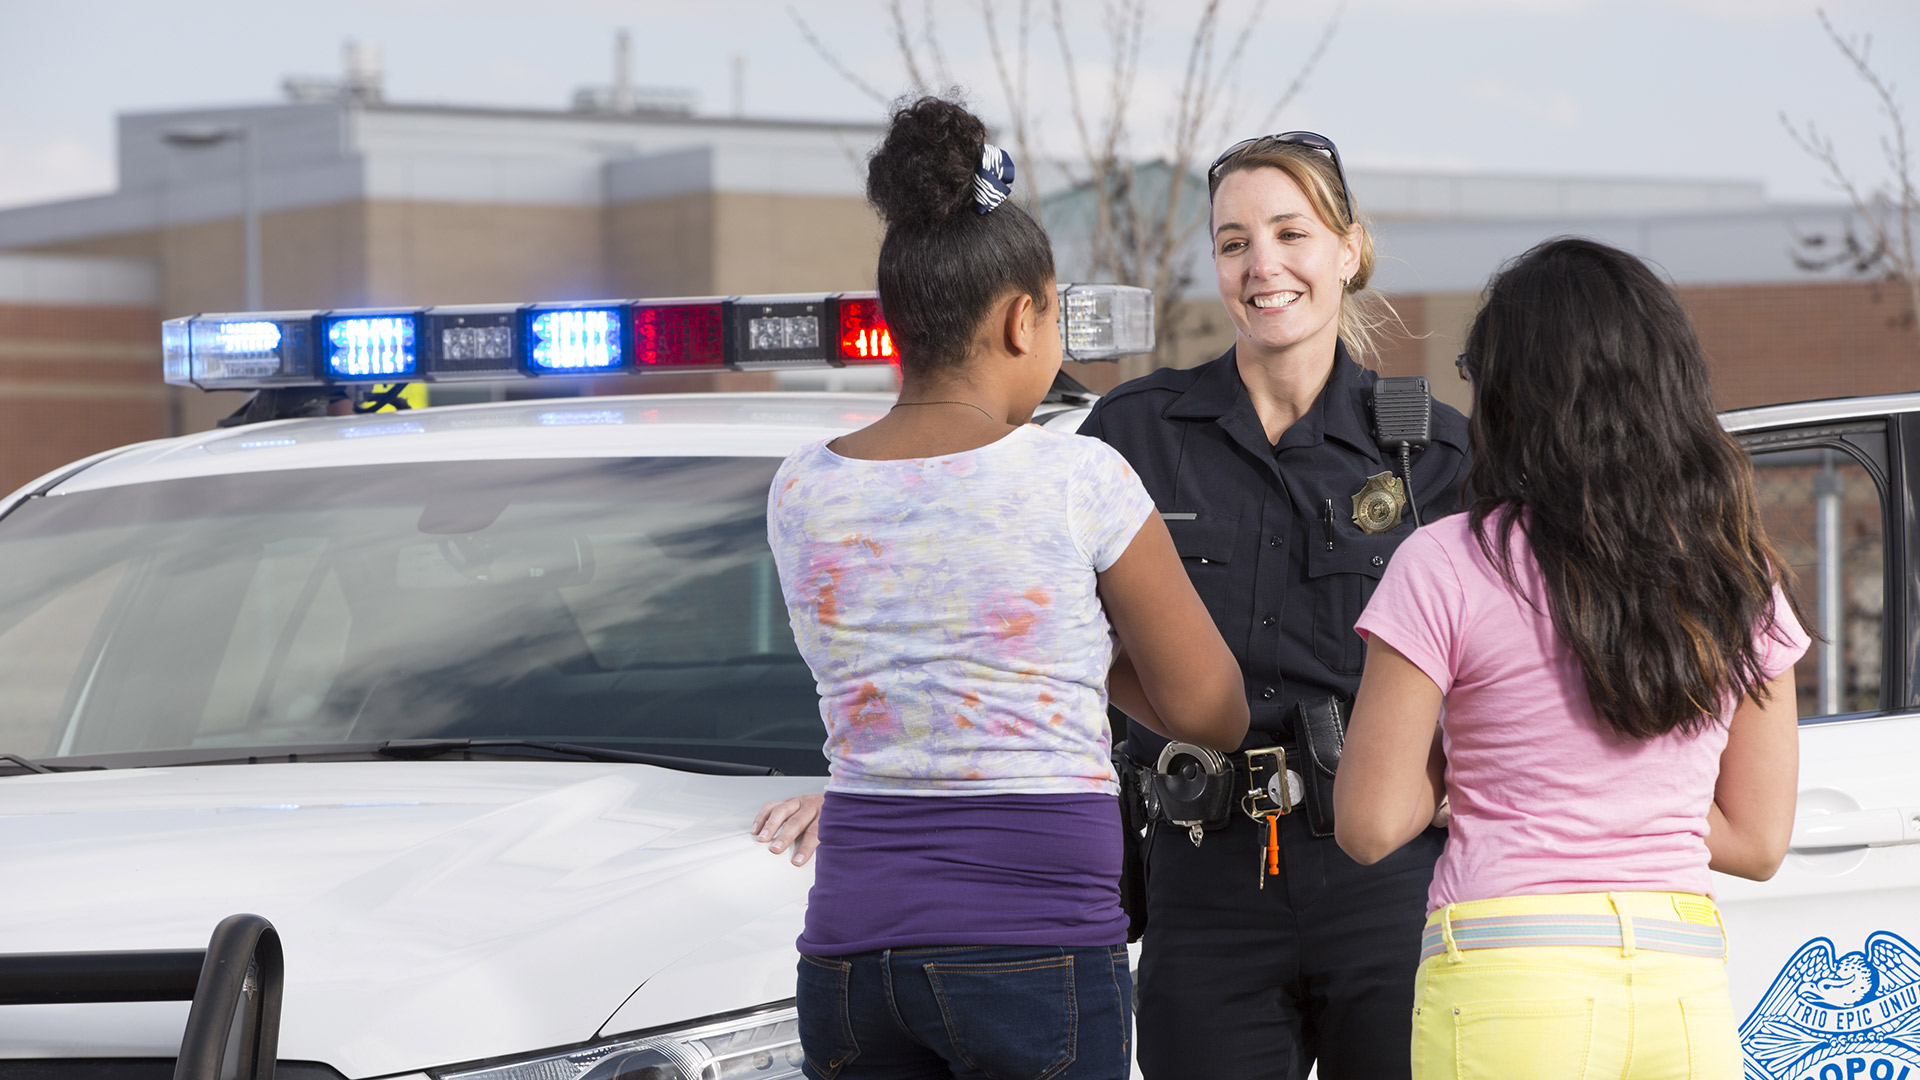 A police officer smiling at two teenagers who have their back to the camera